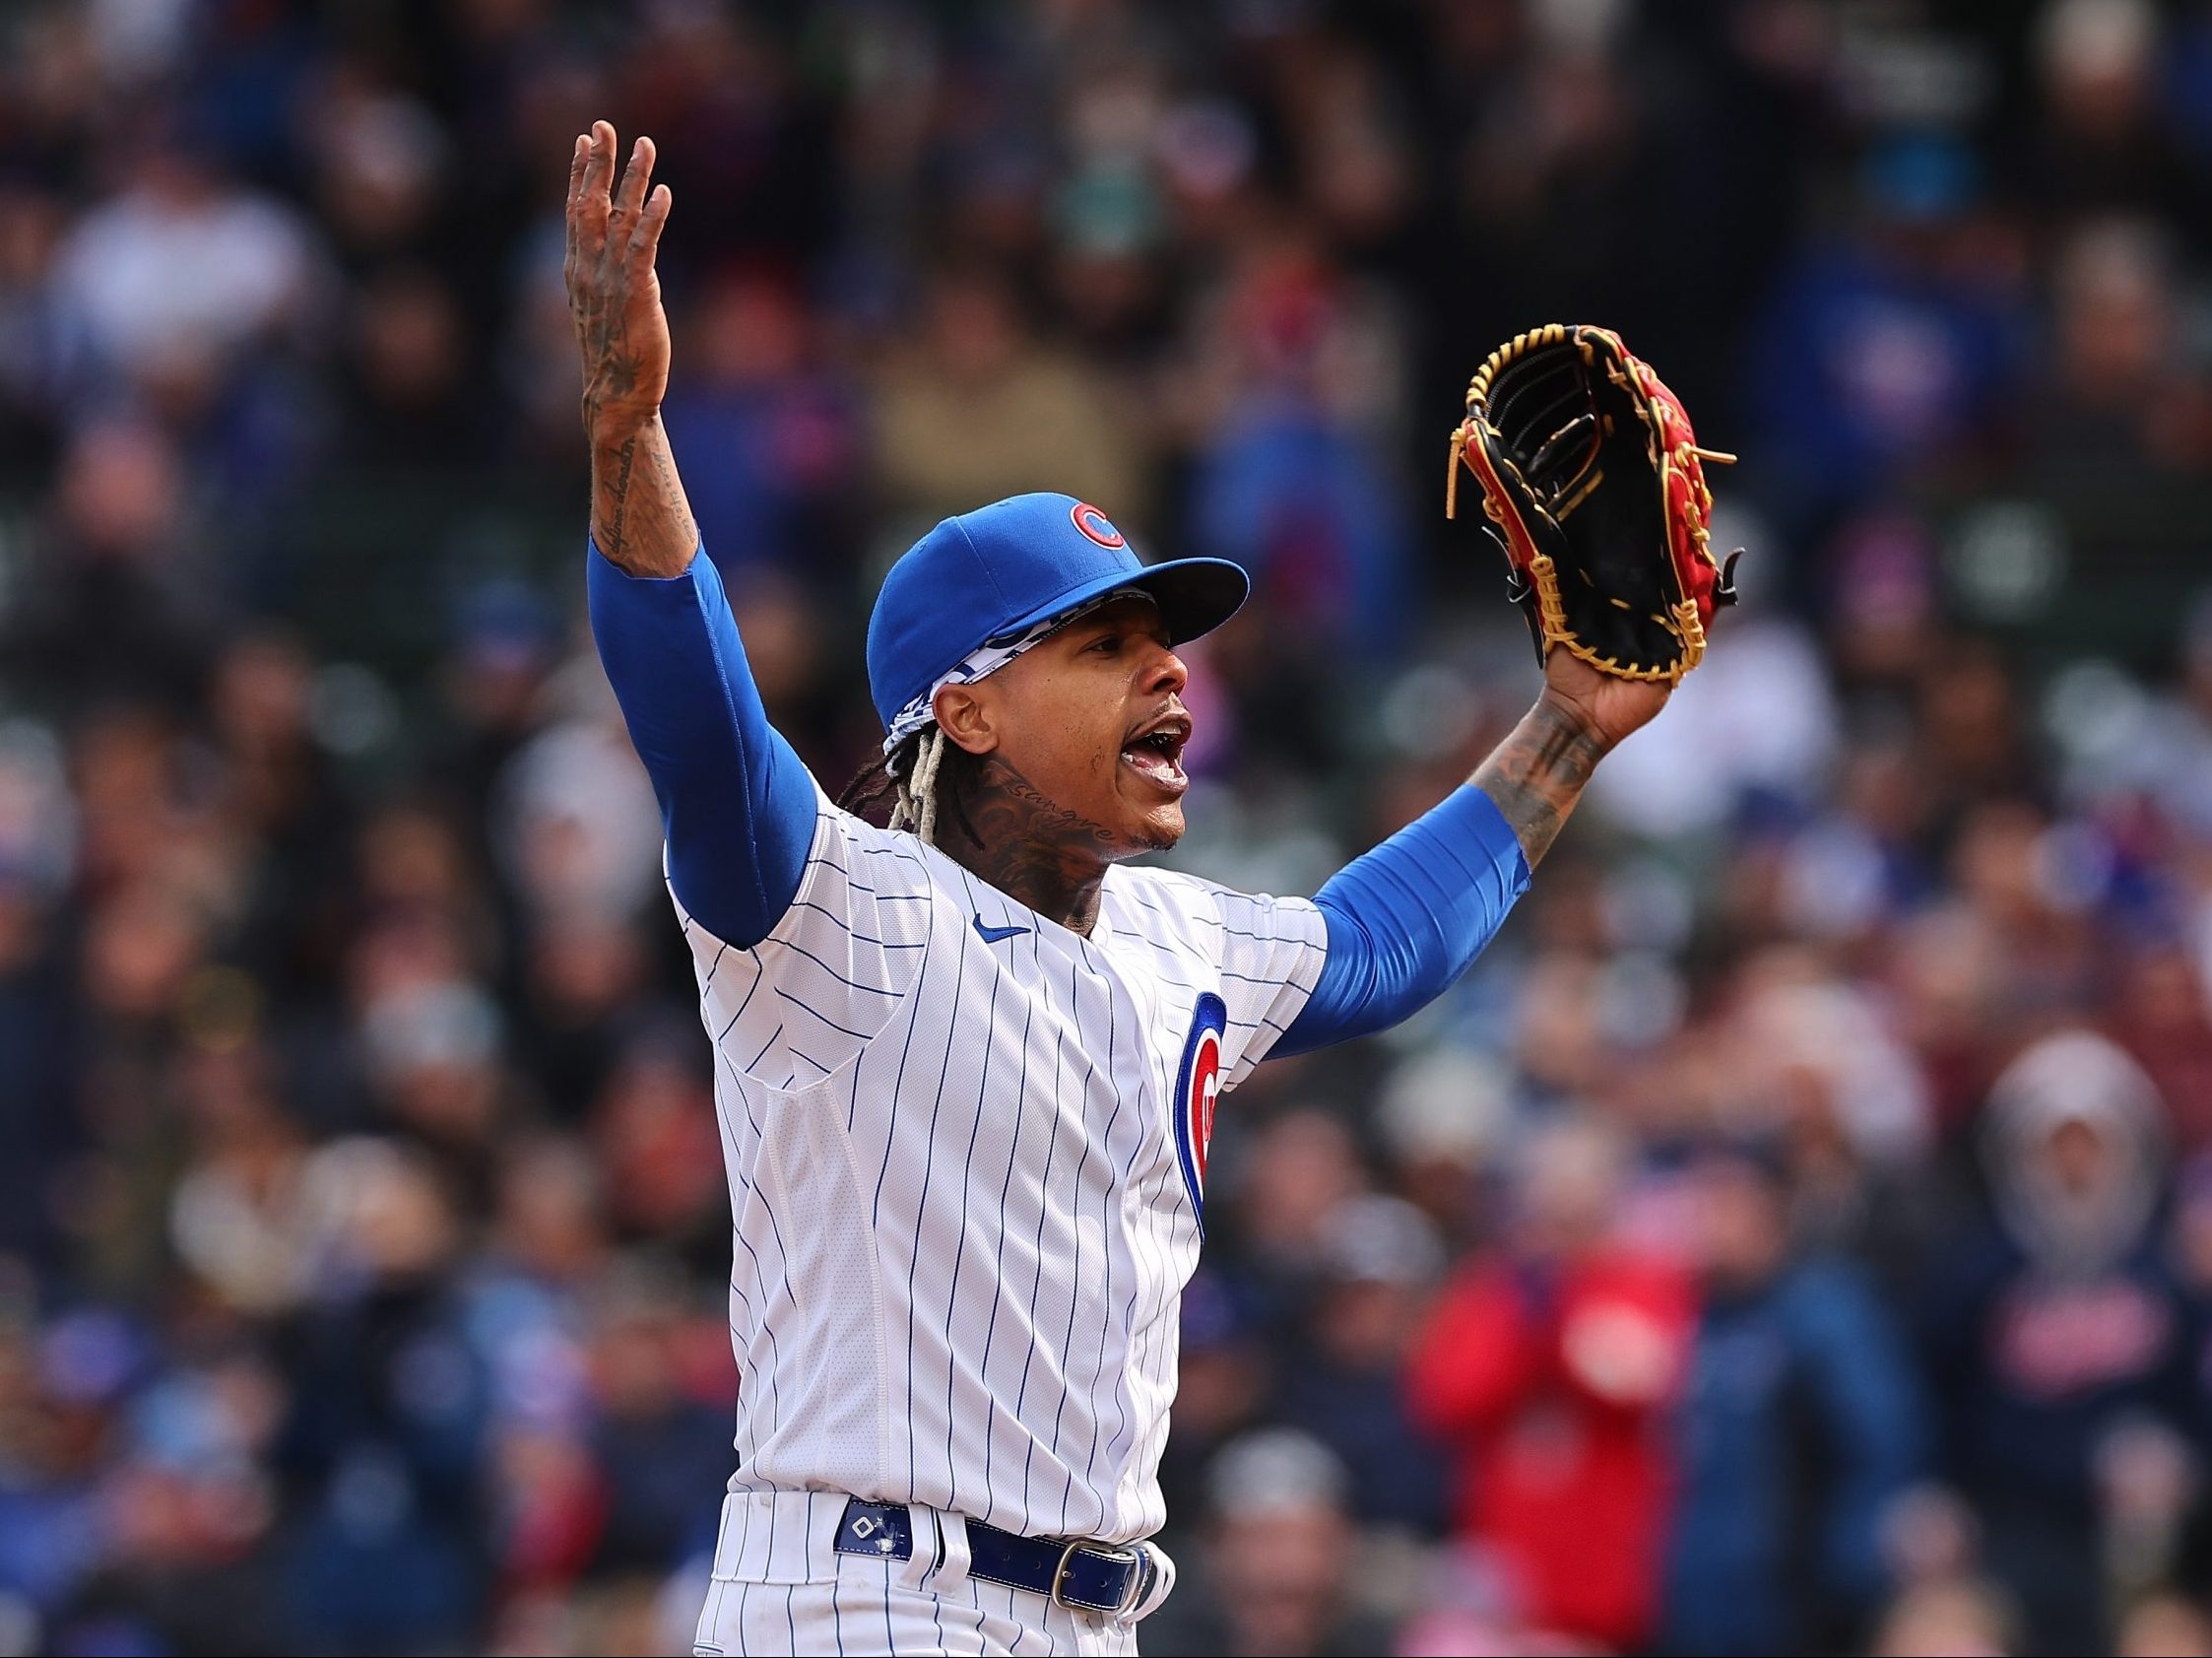 Marcus Stroman is already talking about playing for a different team